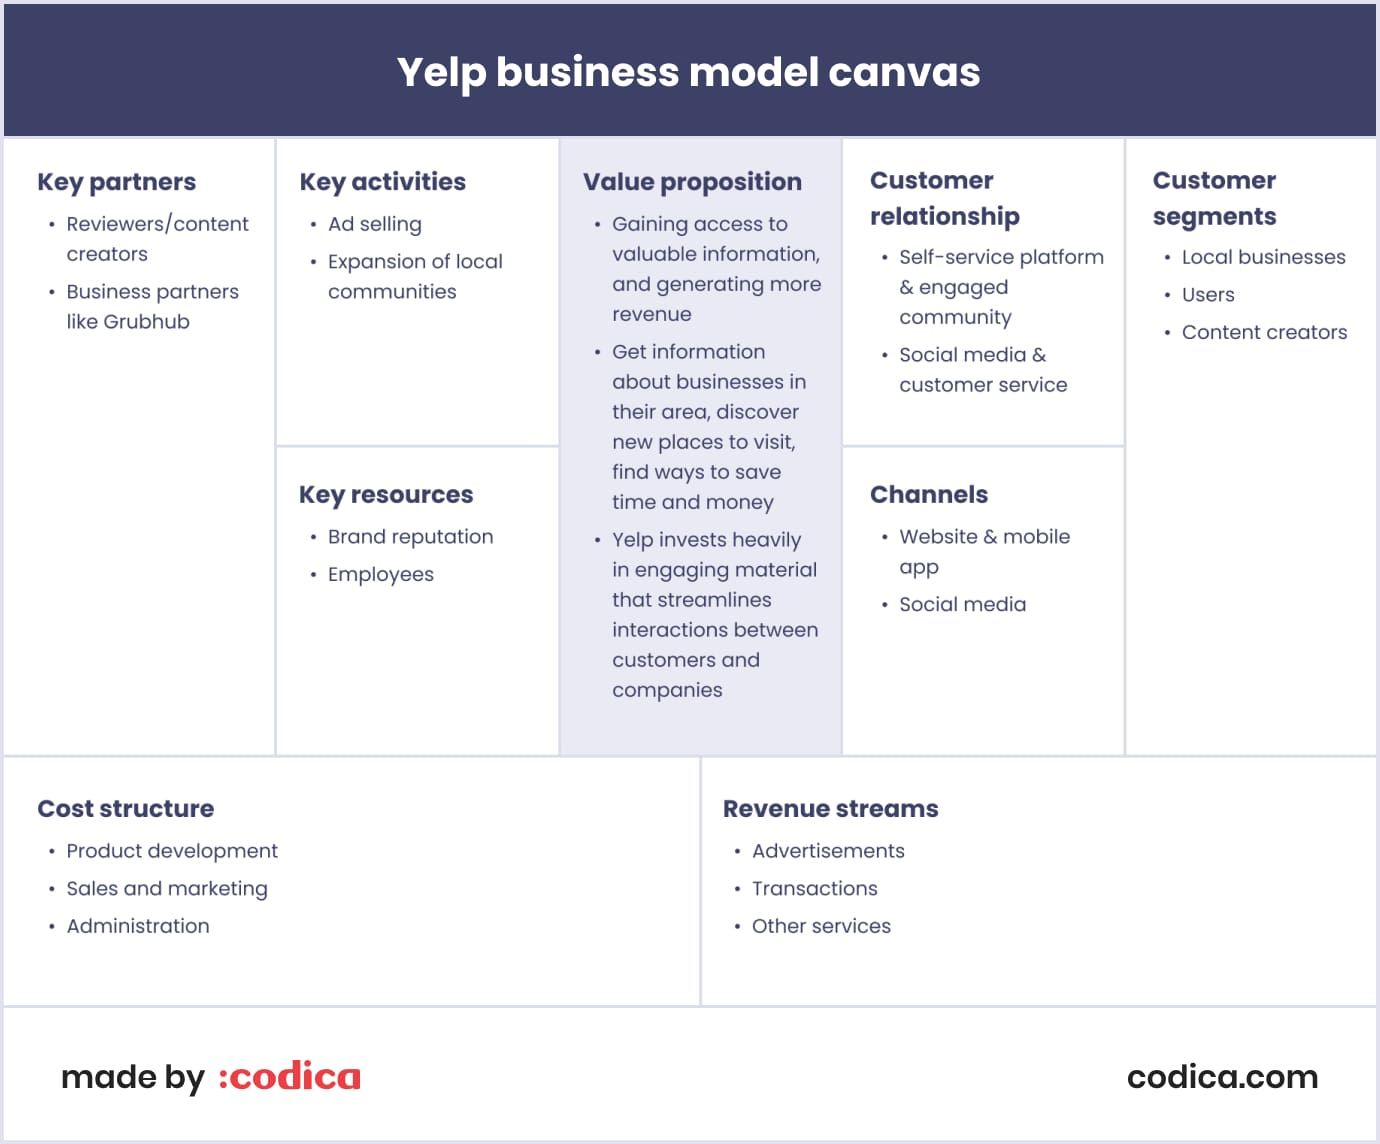 Yelp business model canvas